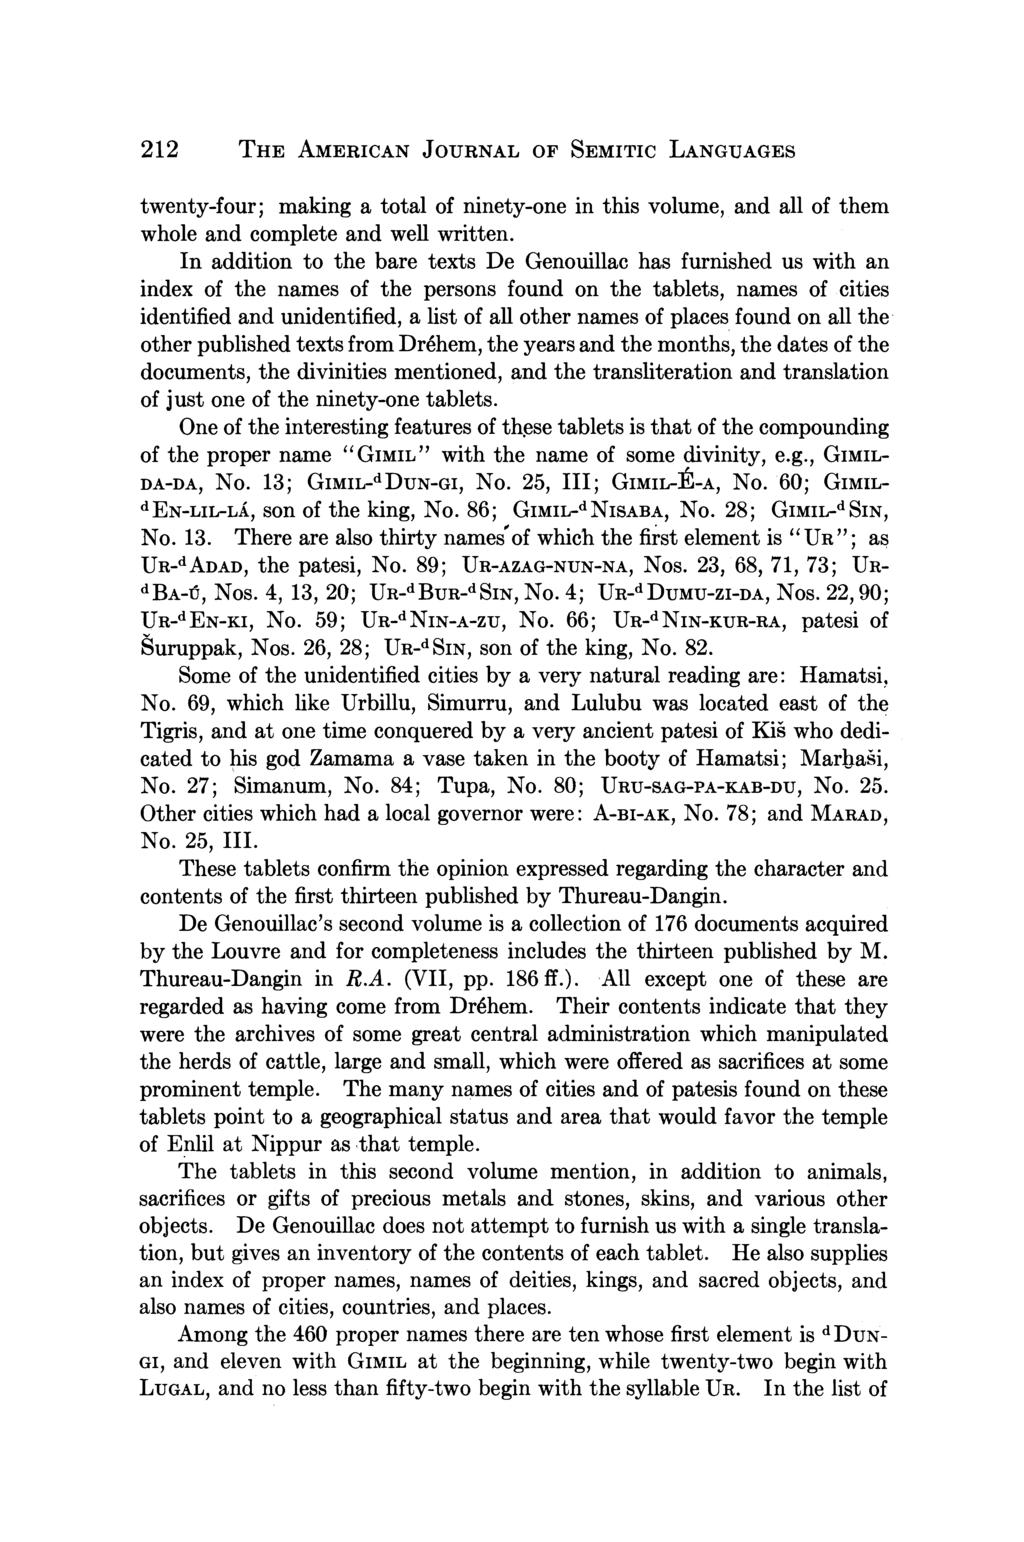 212 THE AMERICAN JOURNAL OF SEMITIC LANGUAGES twenty-four; making a total of ninety-one in this volume, and all of them whole and complete and well written.